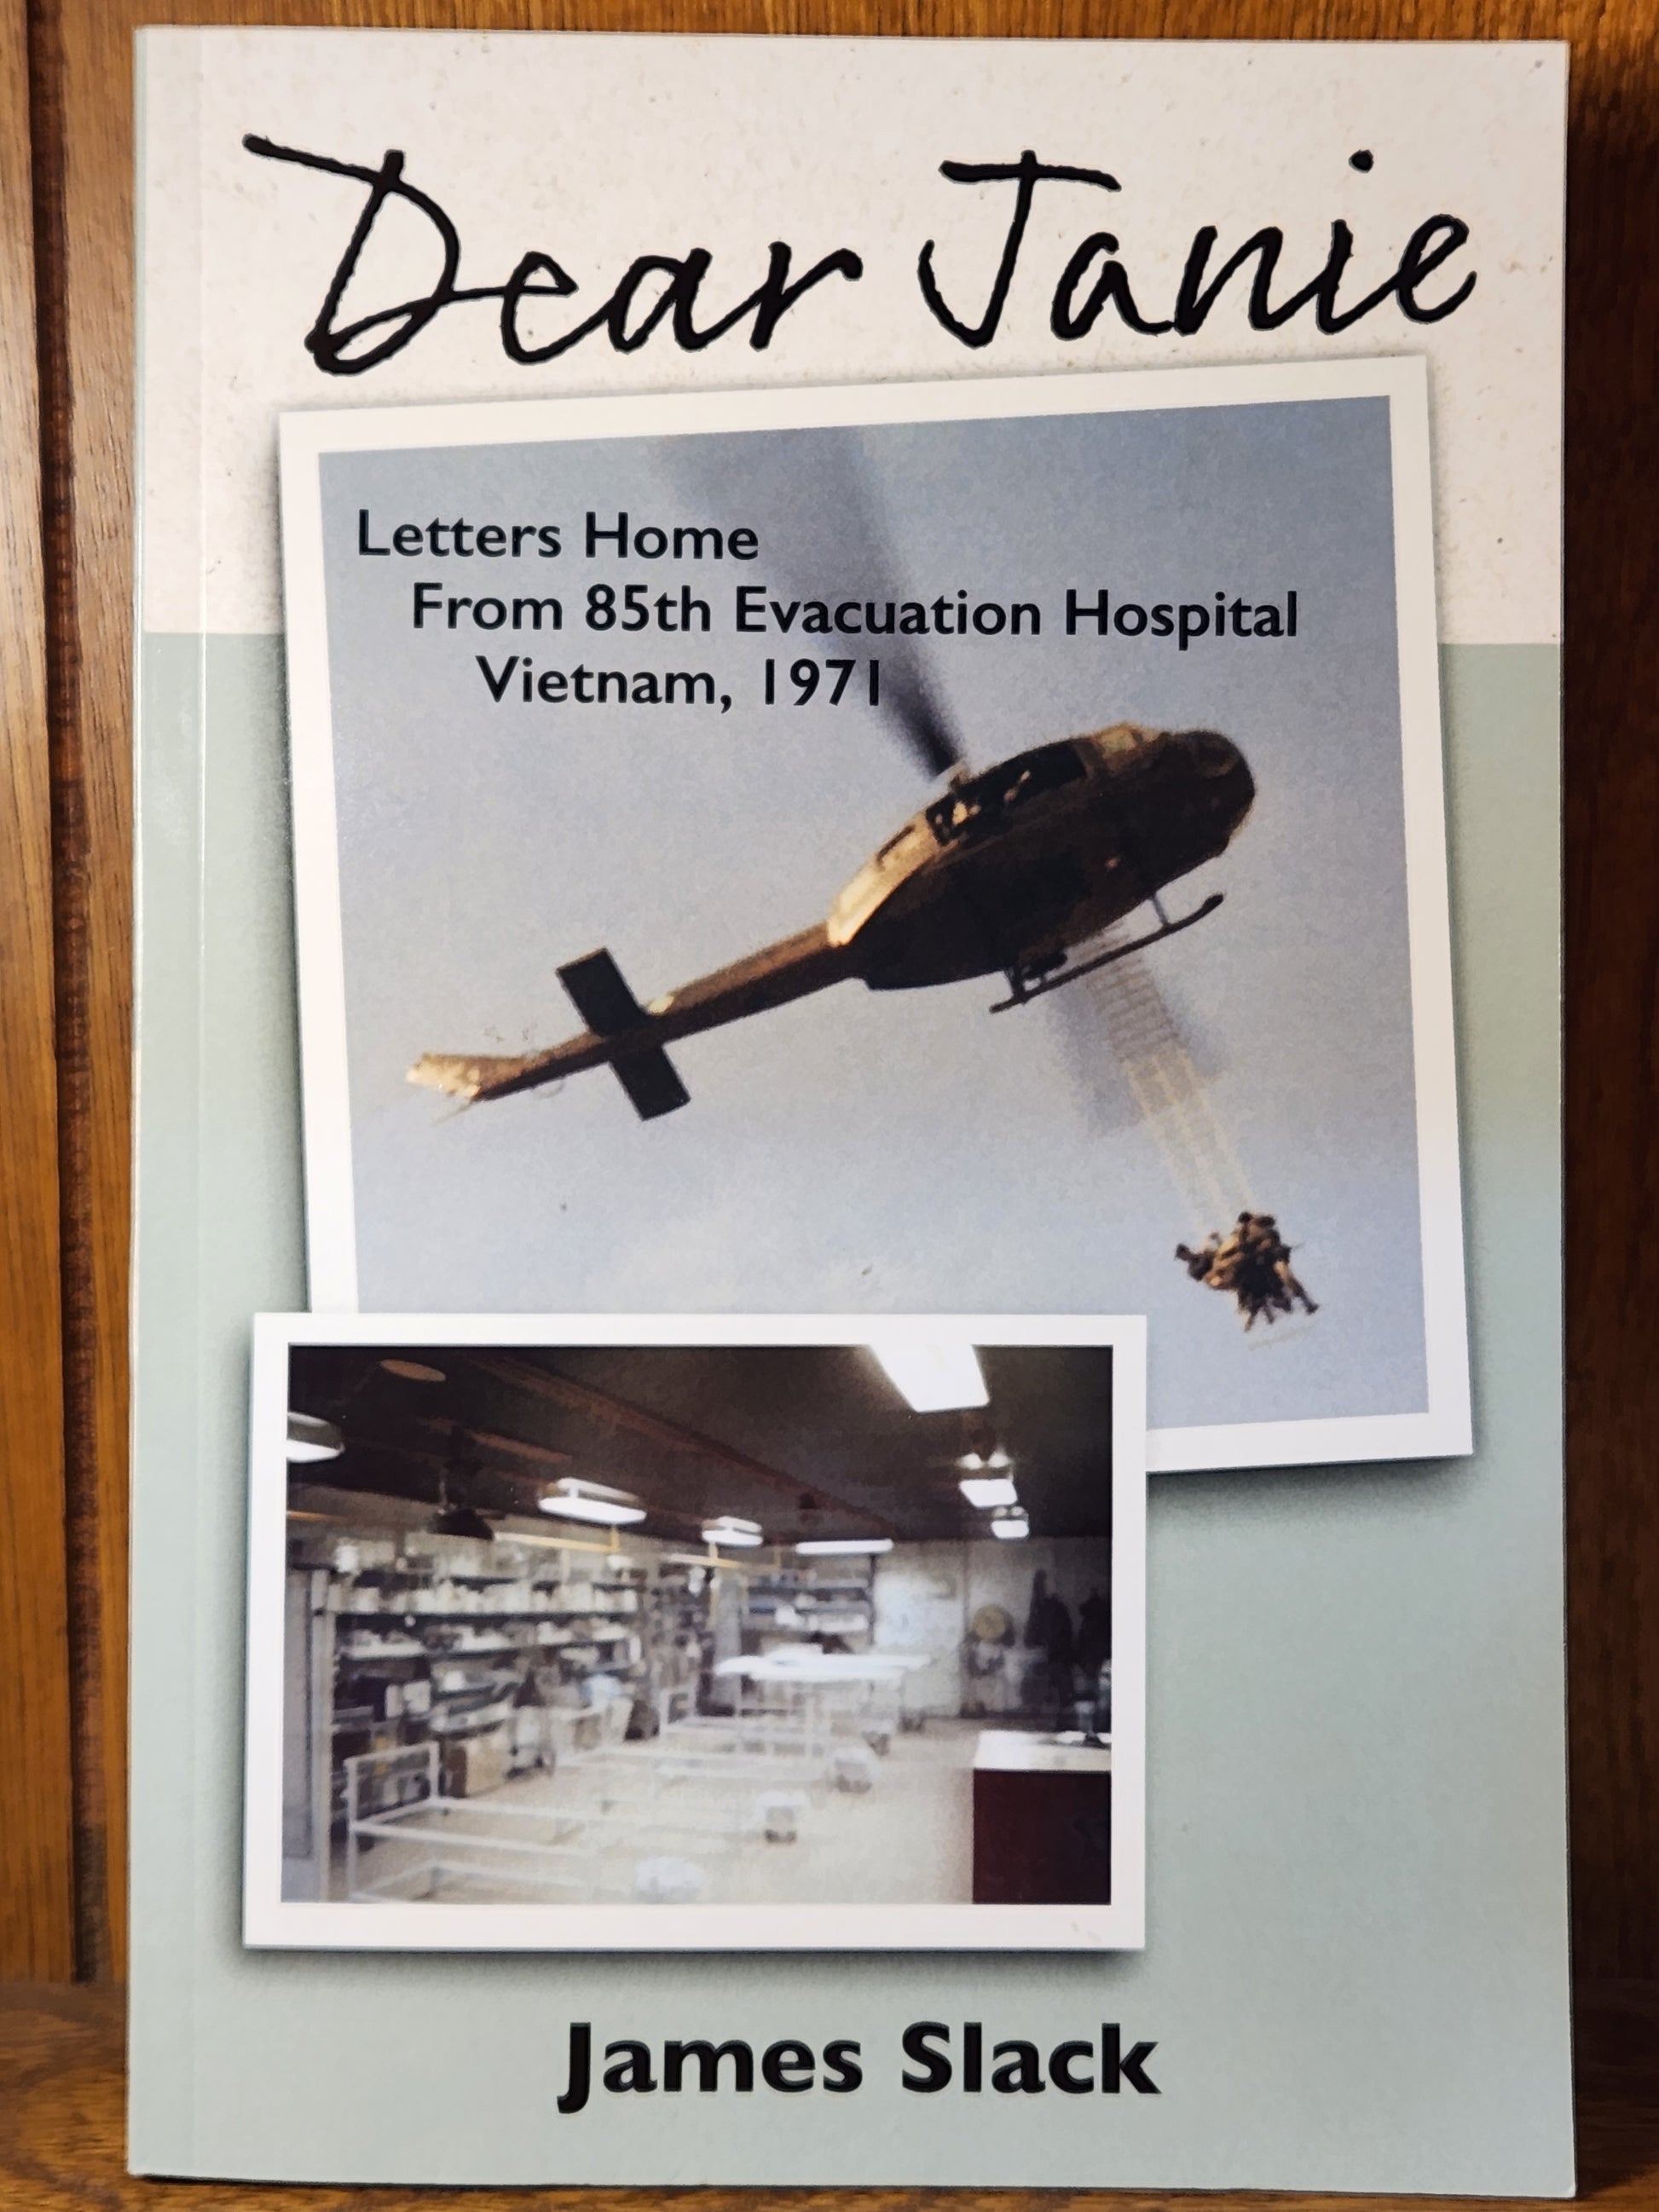 "Dear Janie, Letters Home from the 85th Evacuation Hospital Vietnam, 1971" by James Slack - Dead Tree Dreams Bookstore